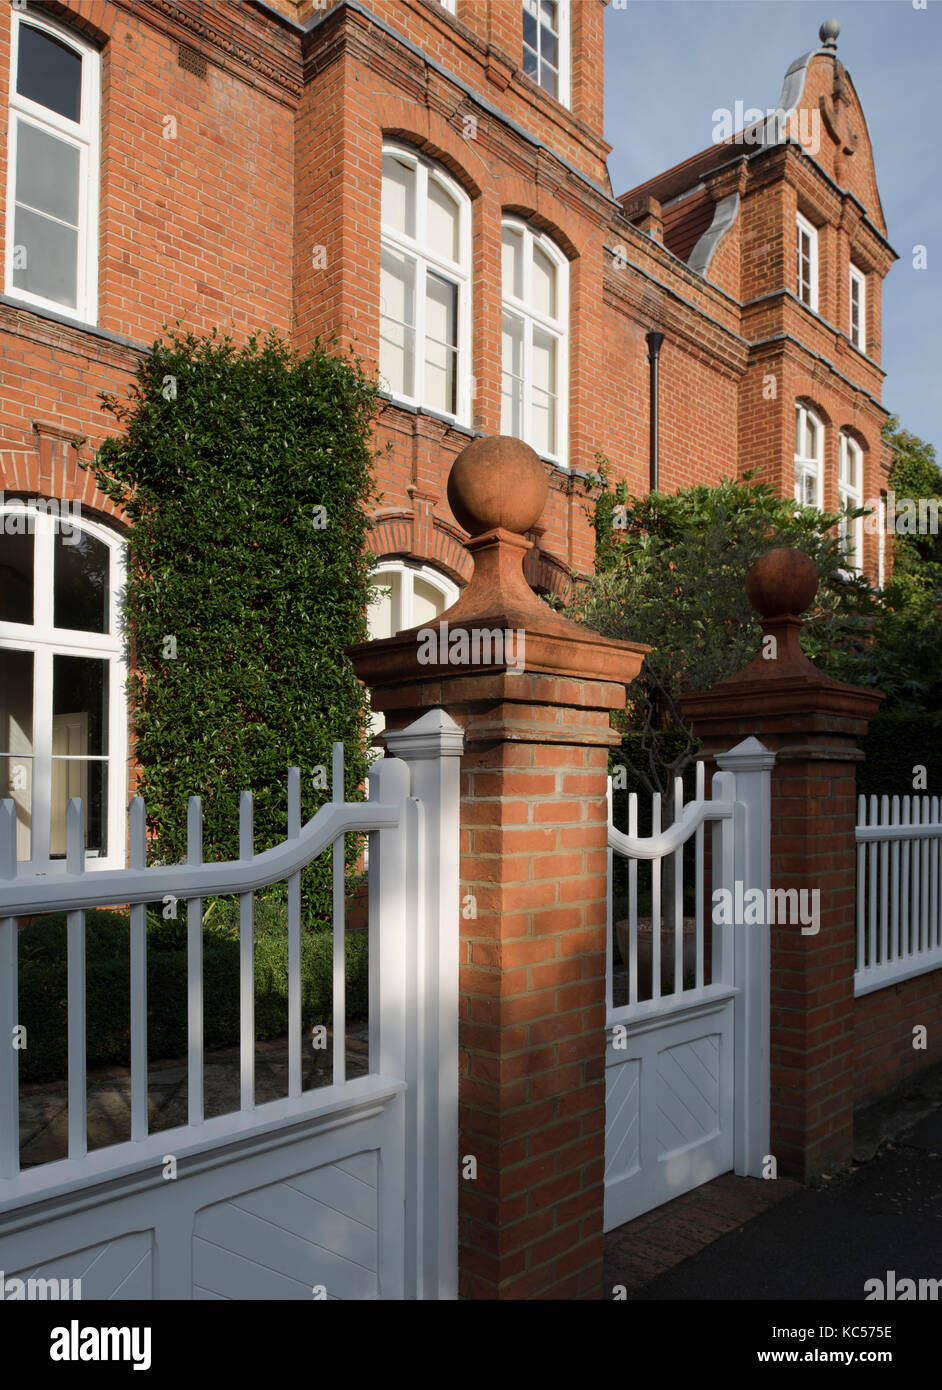 Ball finials on brick pillars and a palisade gate at numbers 3 and 5 Queen Anne’s Grove, Bedford Park, Chiswick, London, UK Stock Photo